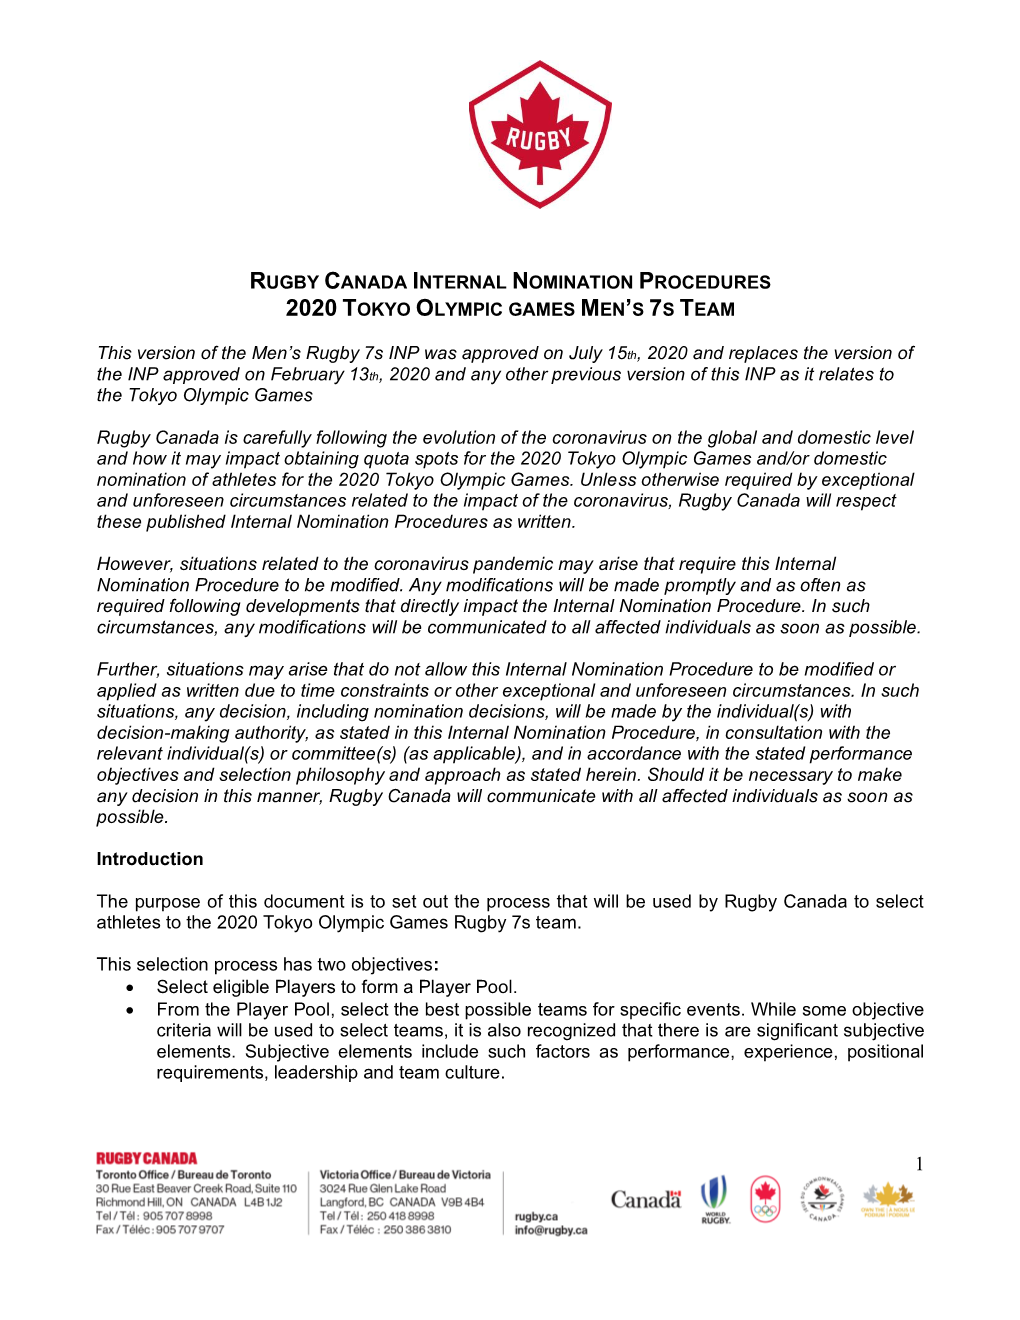 Rugby Canada Internal Nomination Procedures 2020 Tokyo Olympic Games Men’S 7S Team